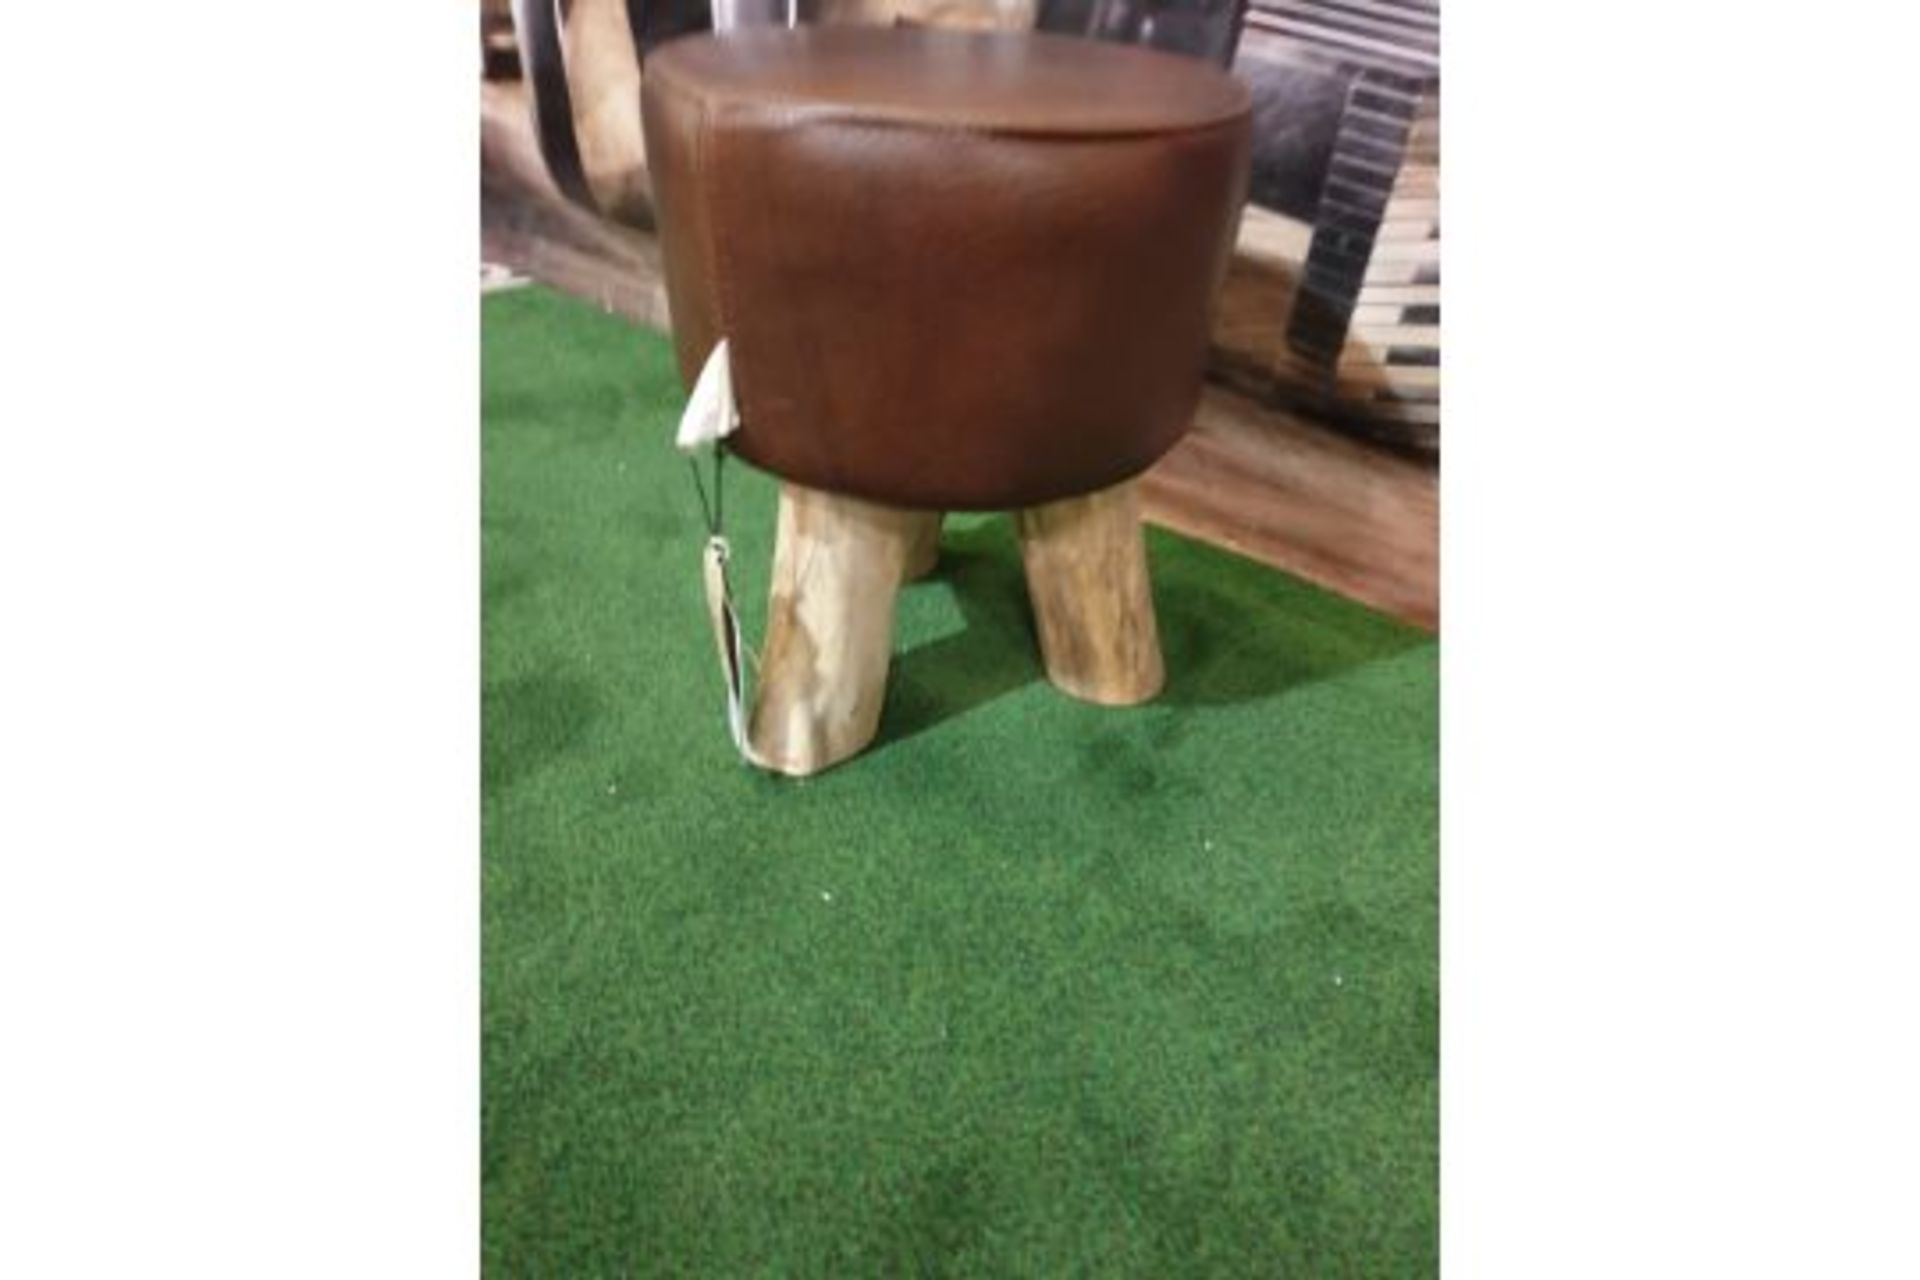 Bleu Nature F016 Mousse Driftwood And Leather Stool Finished In Matador Nuez Hide Leather 380 x